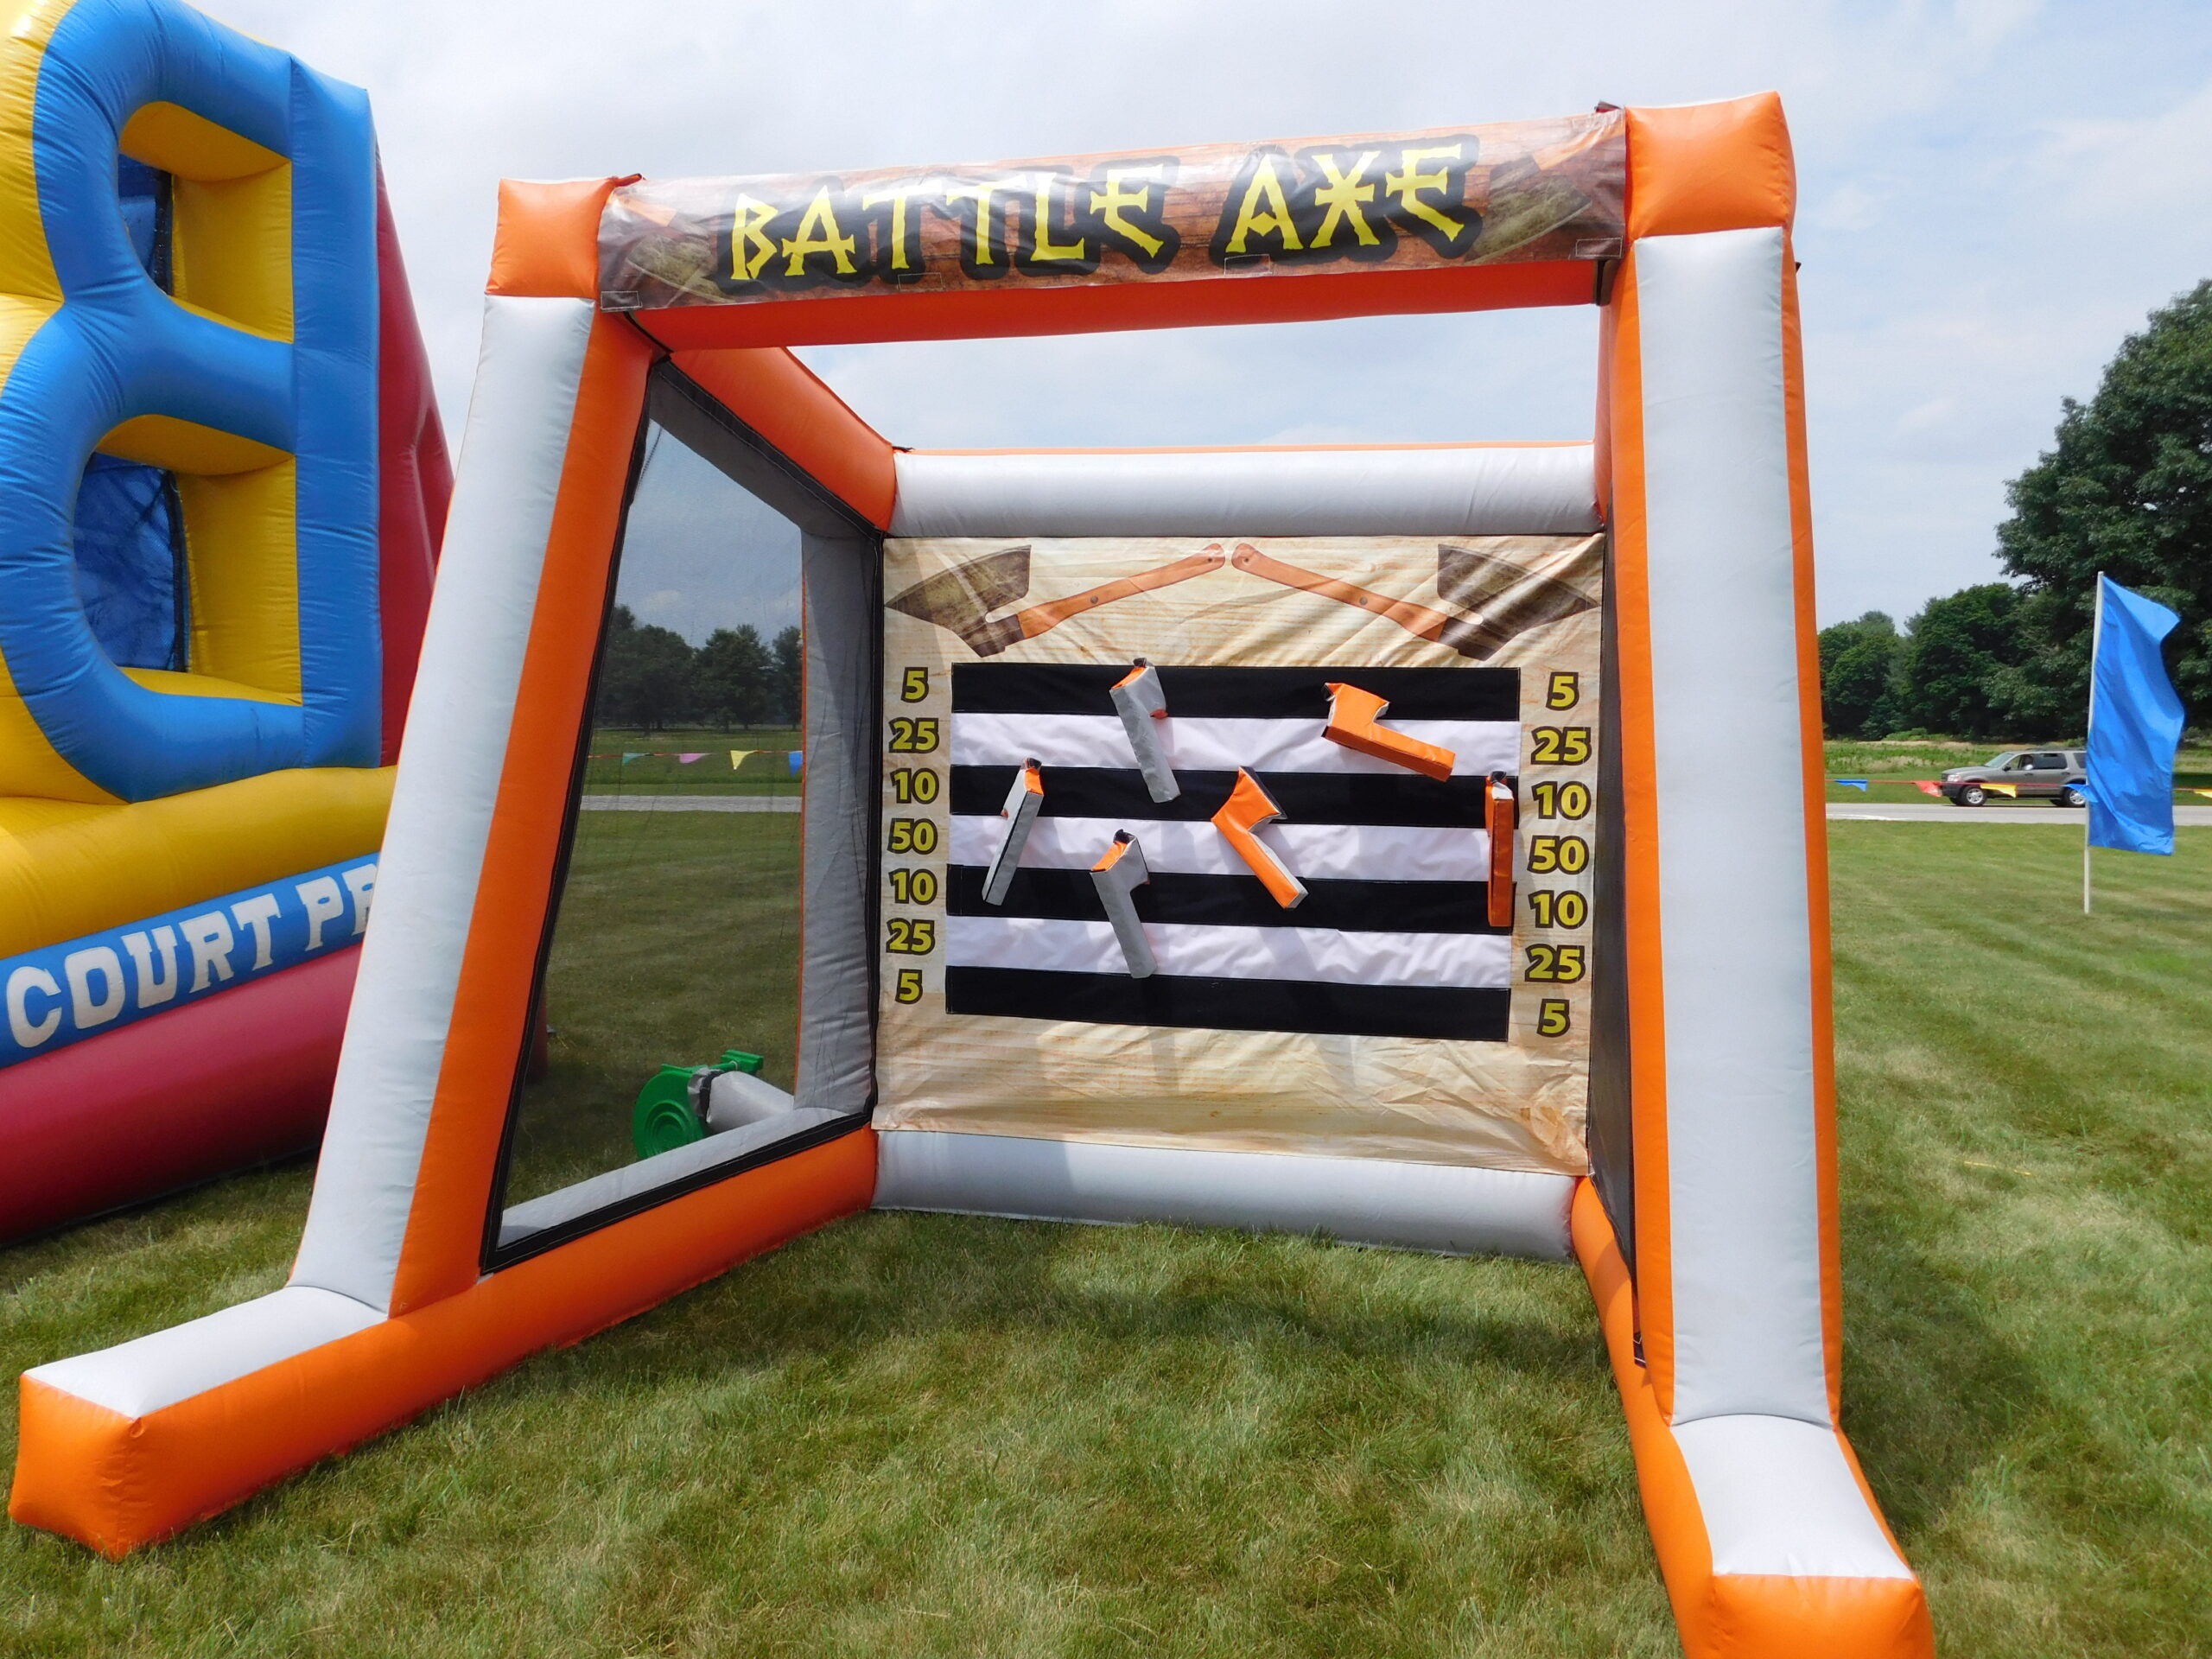 https://magicspecialevents.com/event-rentals/wp-content/uploads/Battle-Axe-Inflatable-Carnival-Game-Magic-Special-Events-4-scaled.jpg